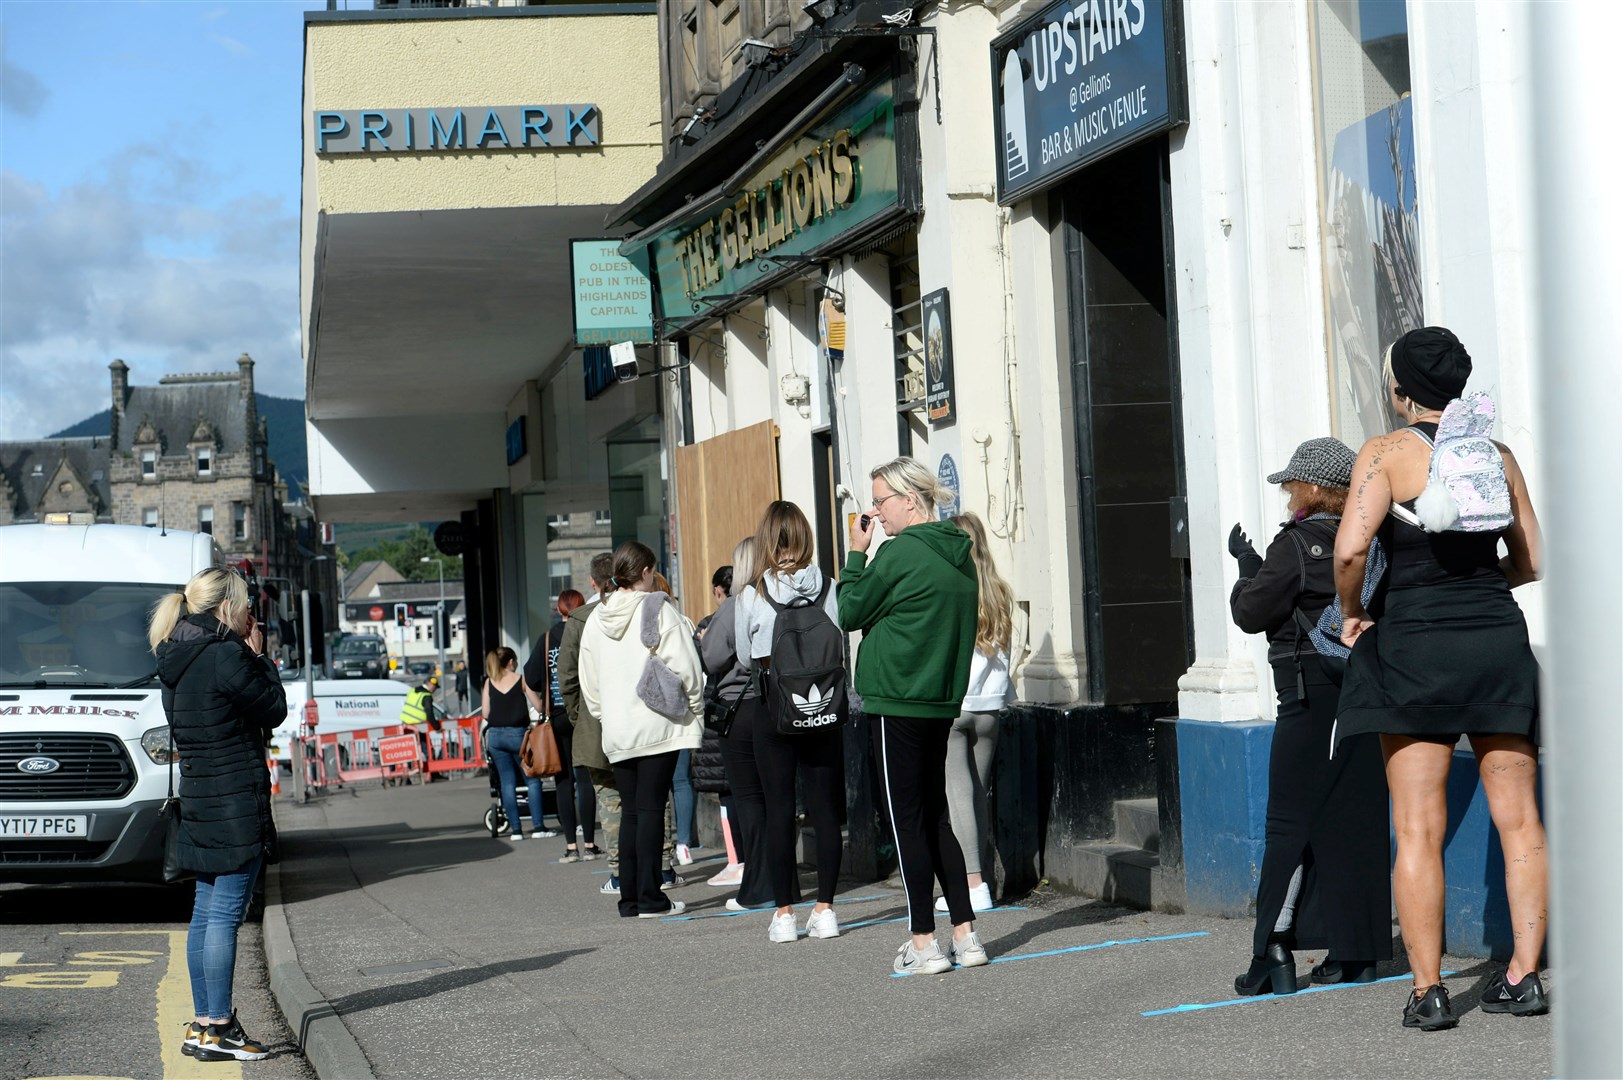 The queue saw shoppers socially distanced along the High Street and into Church Street.